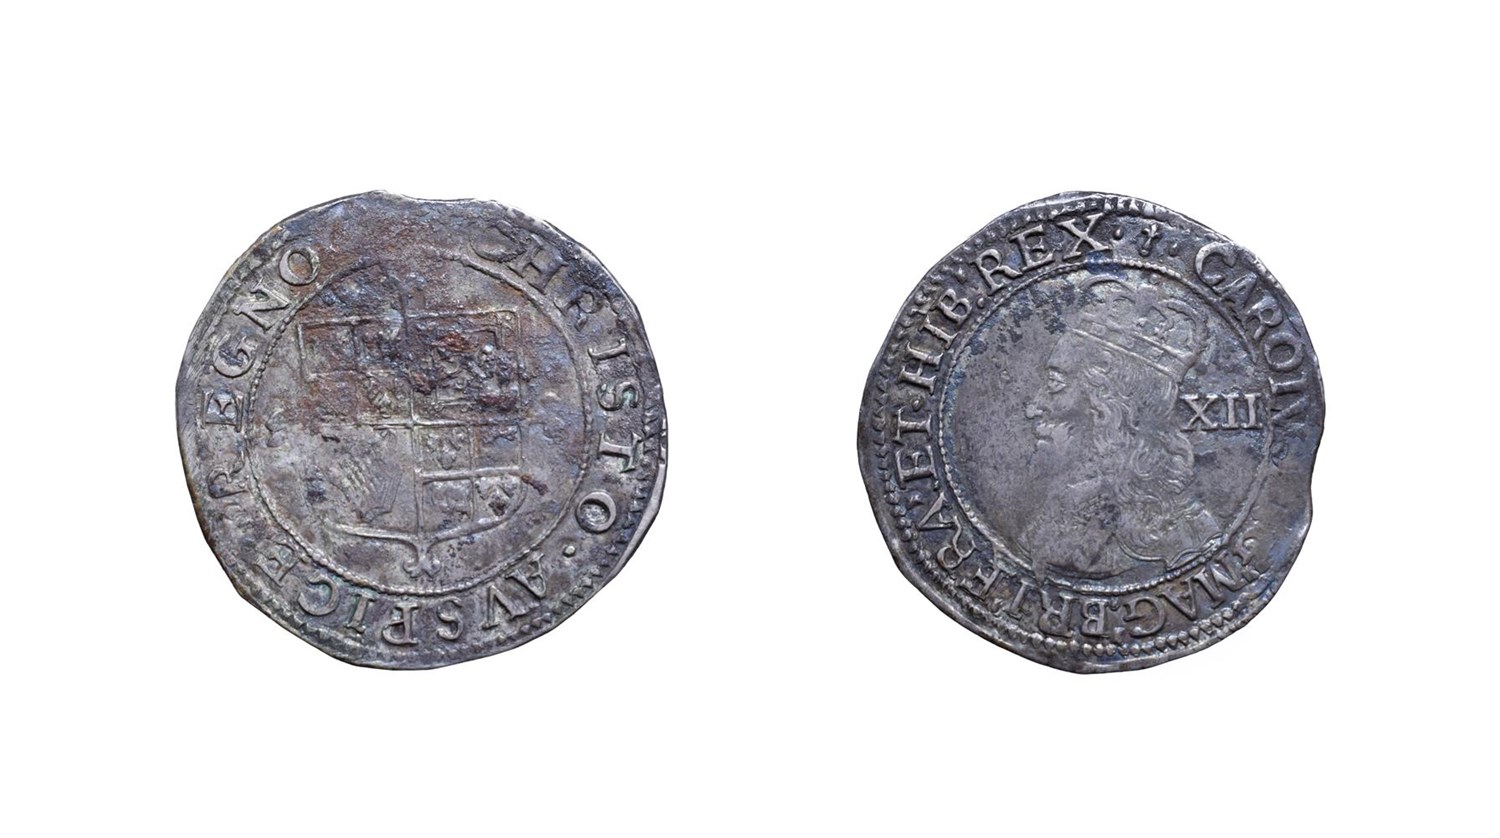 Lot 4076 - Charles I, 1631 - 1632 Shilling. 5.92g, 31.3mm, 8h. Tower mint under the king, mintmark lis....